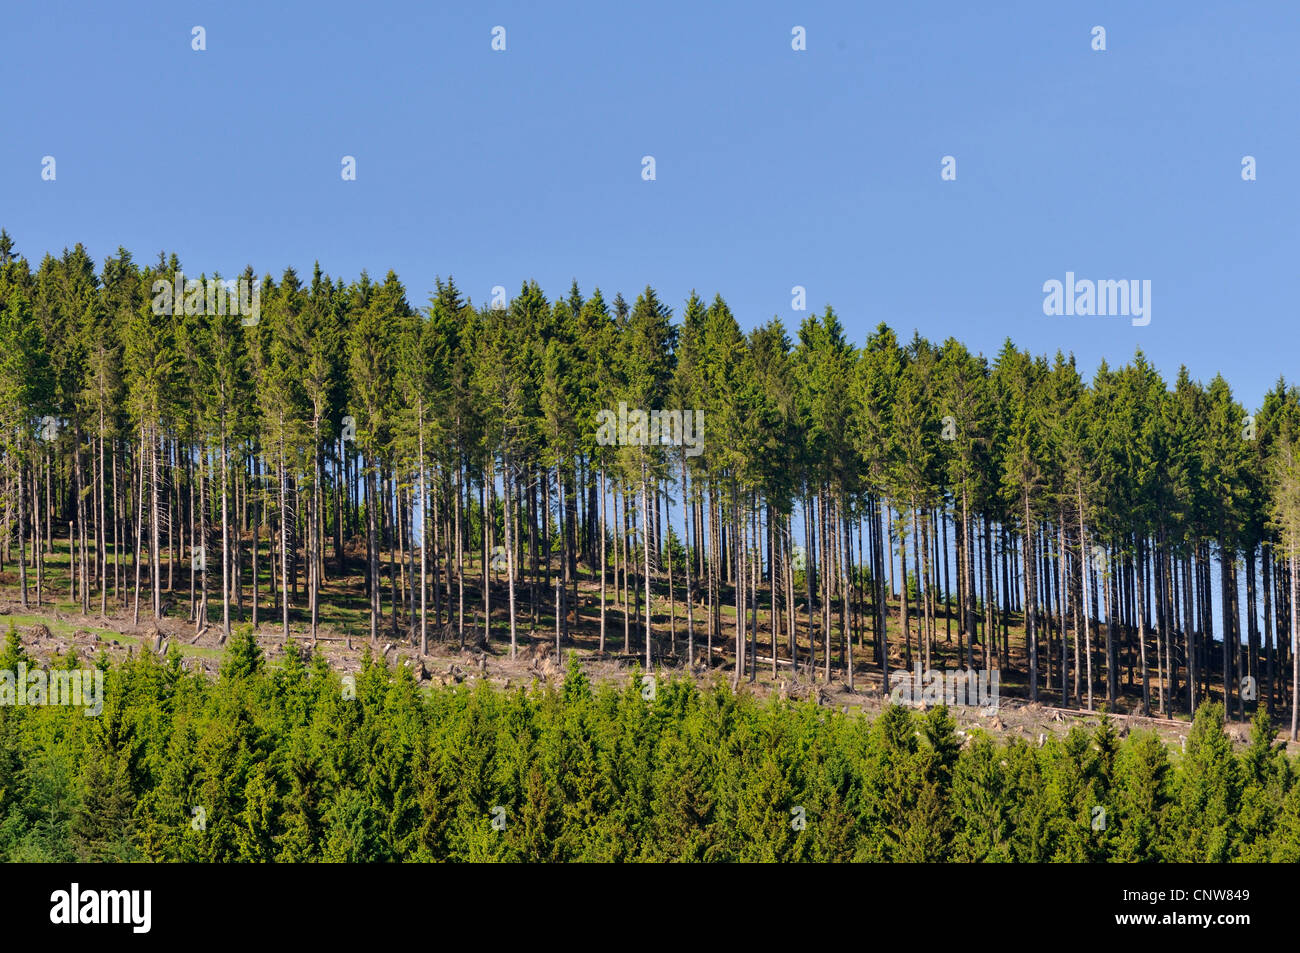 Norway spruce (Picea abies), spruce forest, Germany Stock Photo